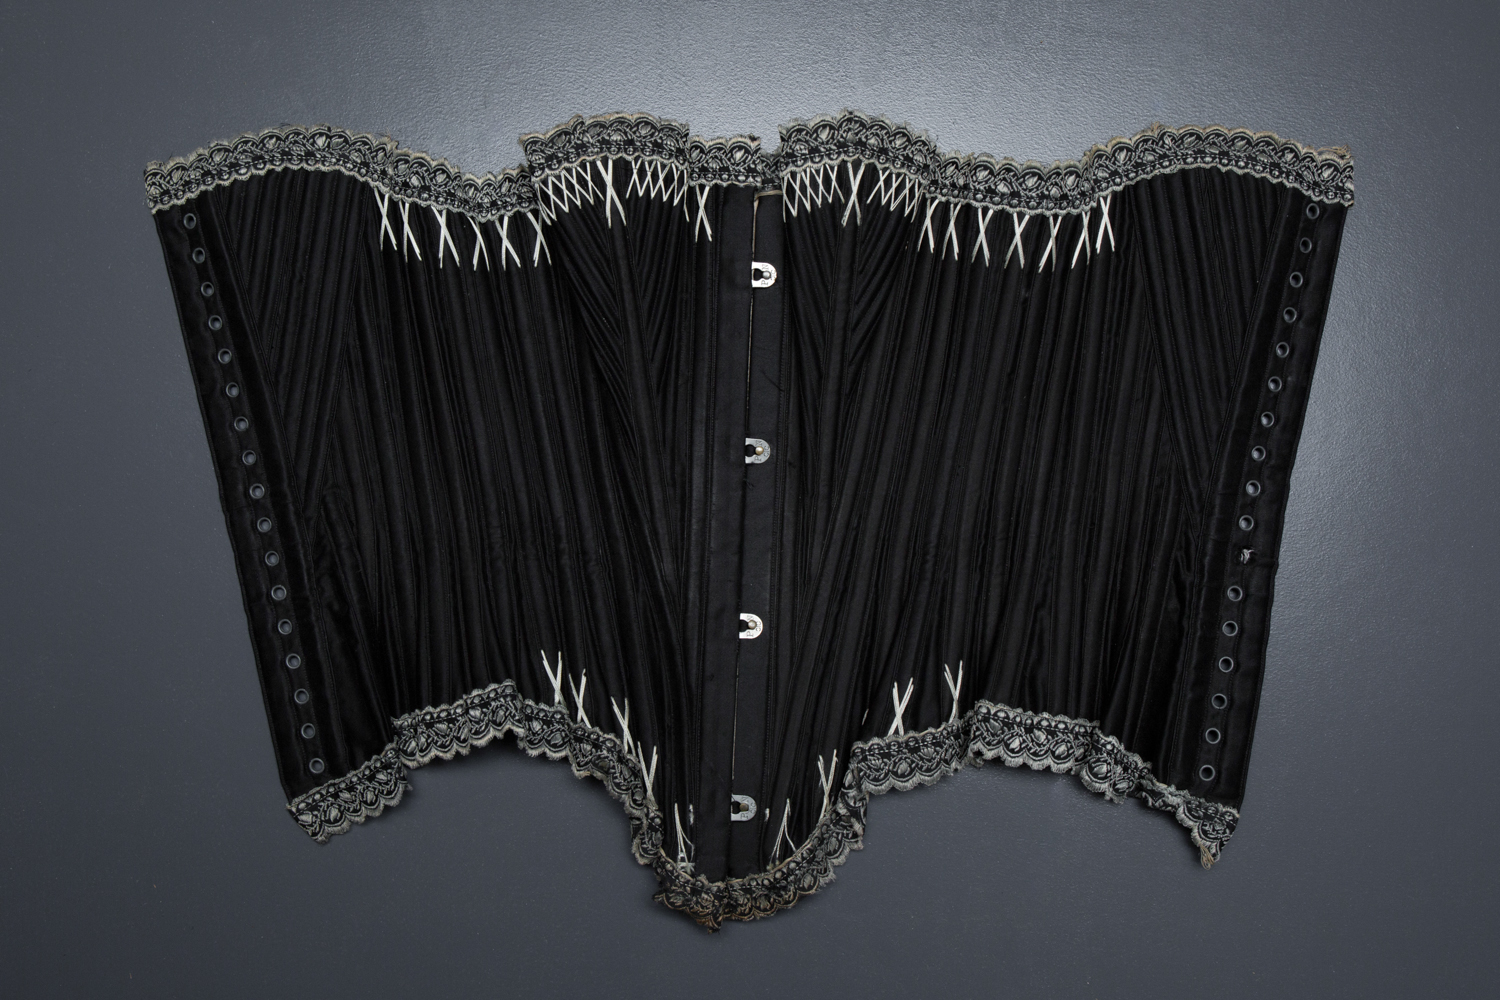 Black Cotton Sateen Corset With White Flossing & Woven Trim by P. N., C. late 1880s - early 1890s, USA. The Underpinnings Museum. Photography by Karolina Laskowska